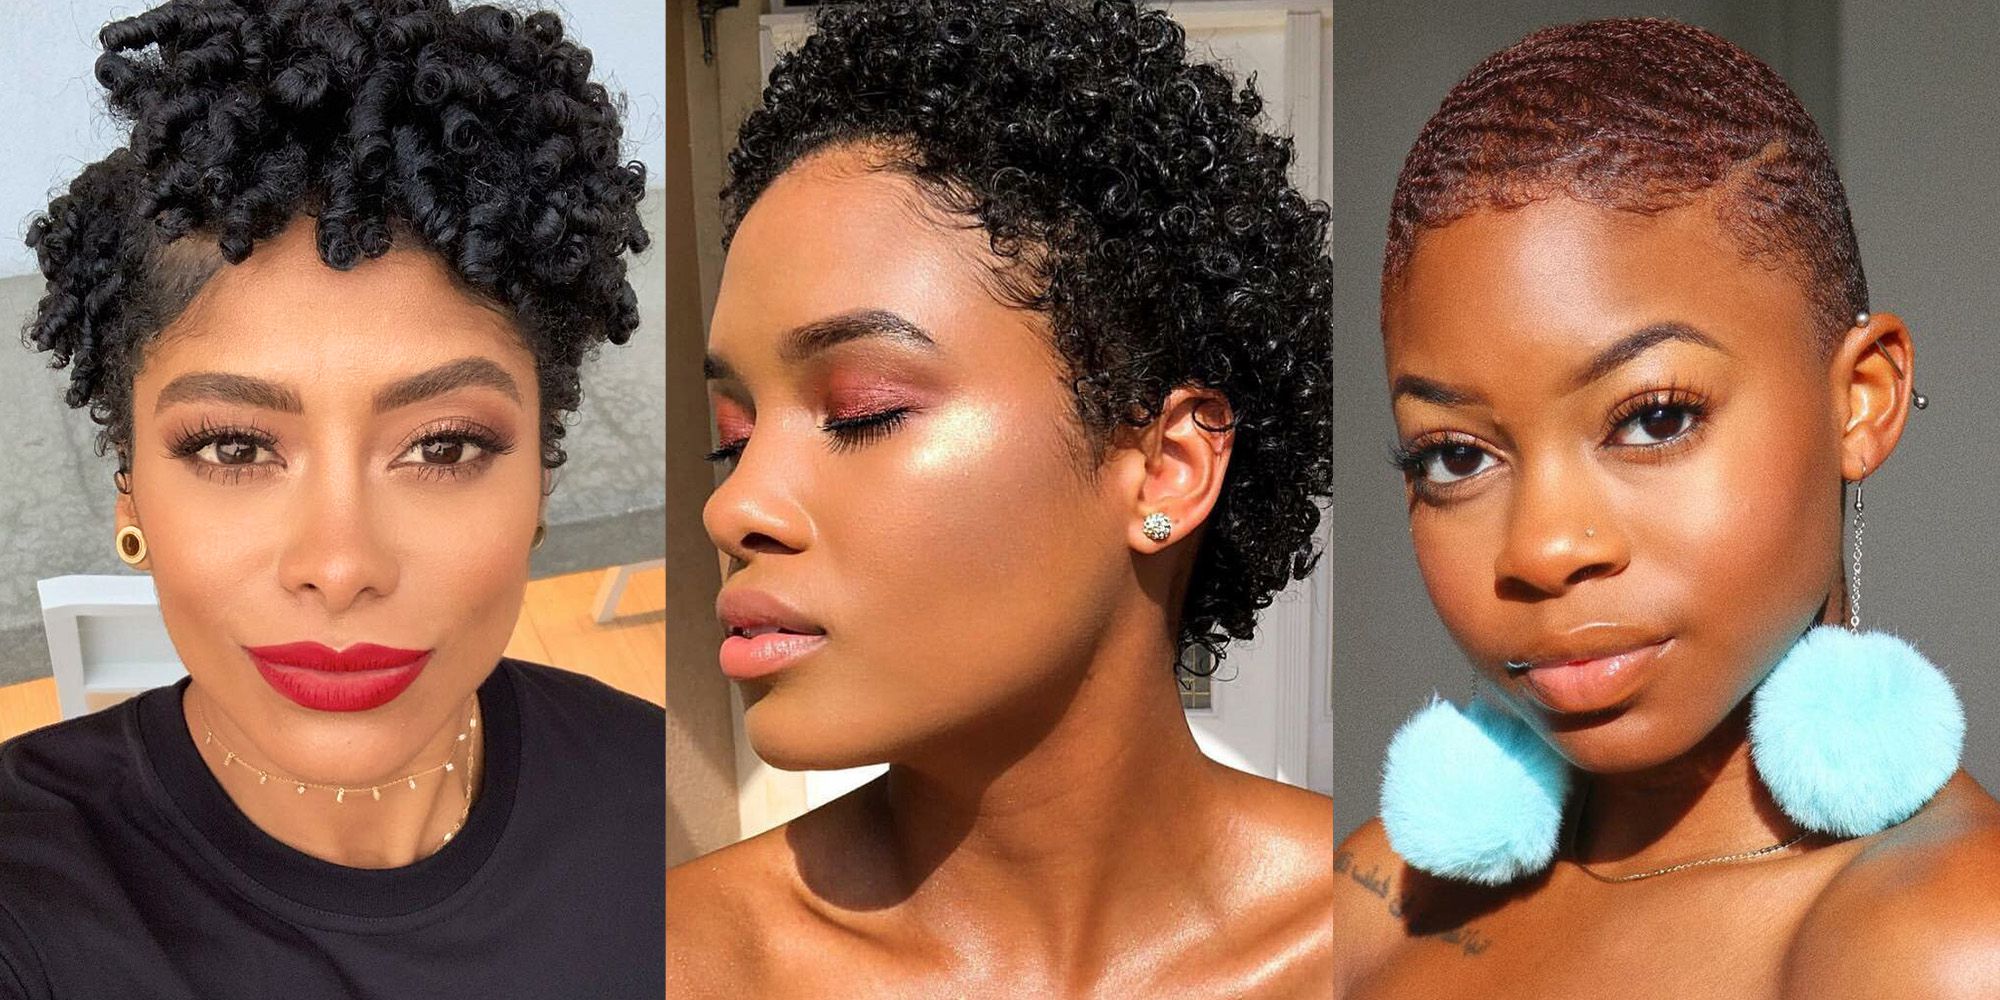 14 Short Natural Hairstyles - The Best Hairstyles for Short Natural Hair